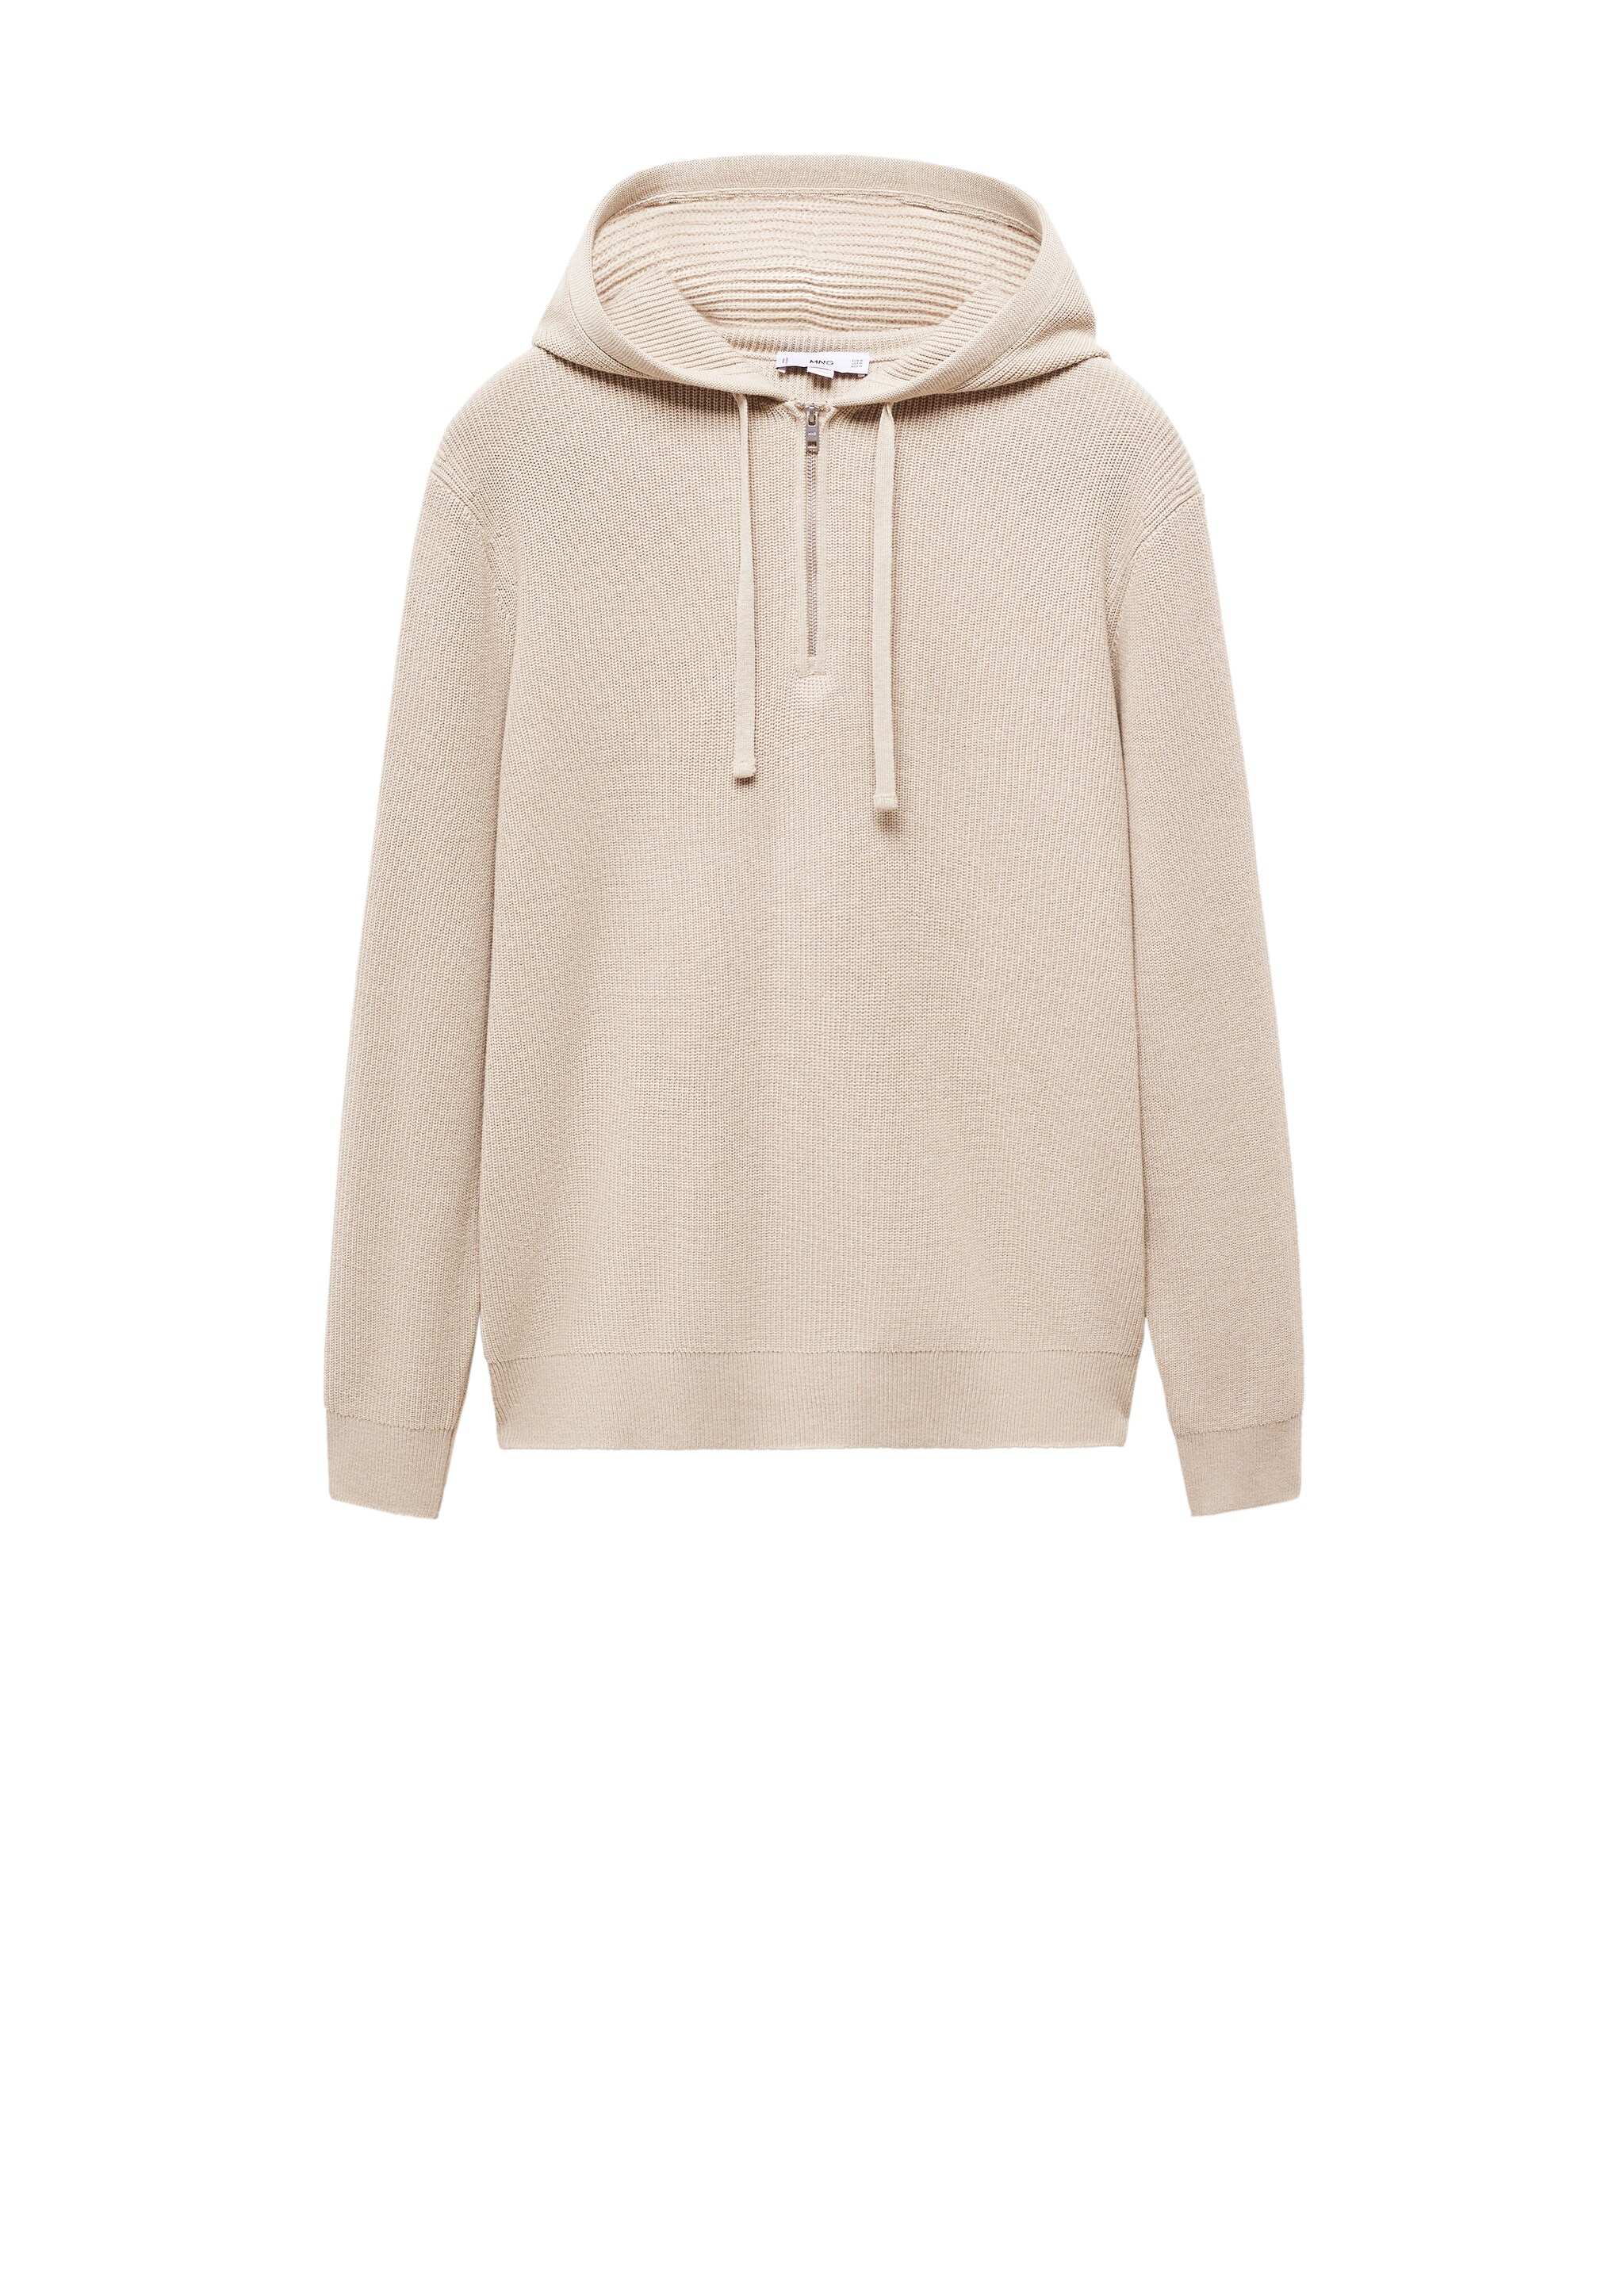 Hooded knit sweatshirt - Details of the article 9